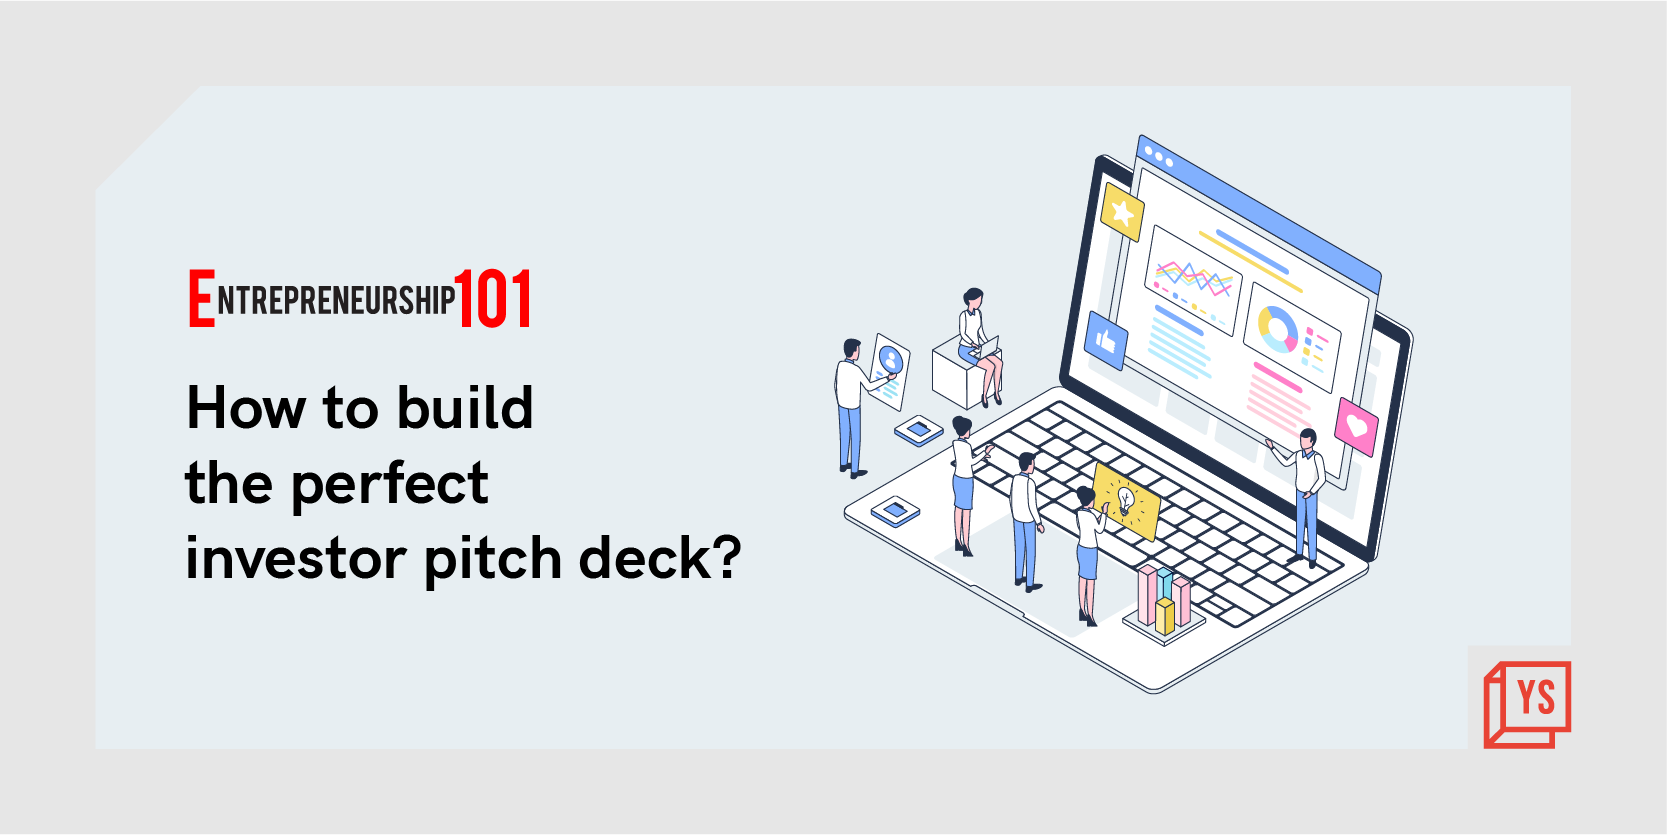 Entrepreneurship 101: How to build the perfect investor pitch deck? 